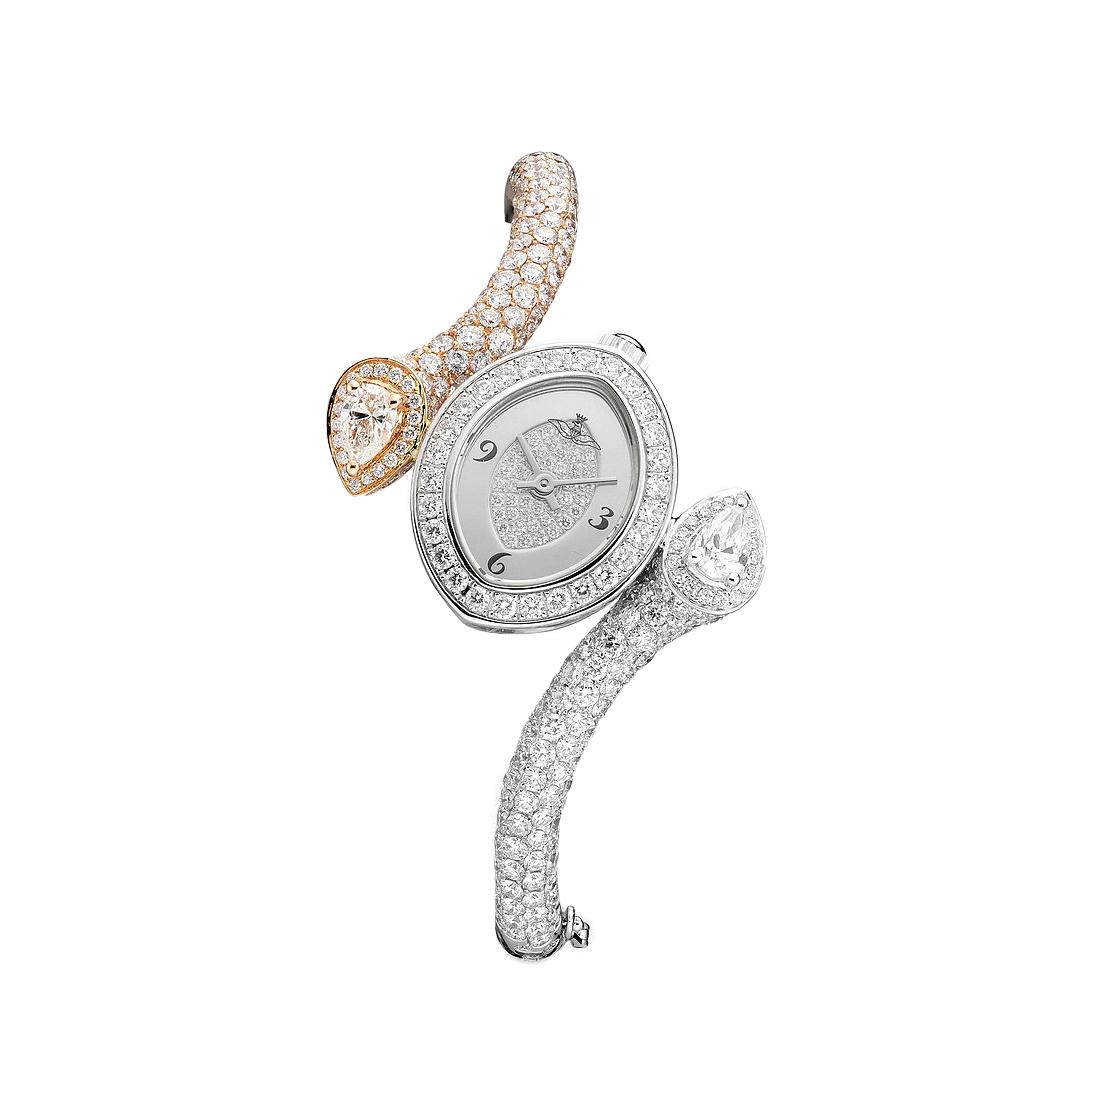 Watch in pink and white gold 18kt set with 2 pear-shaped diamonds 0.78 cts case dial and bracelet set with 342 diamonds 5.64 cts quartz movement